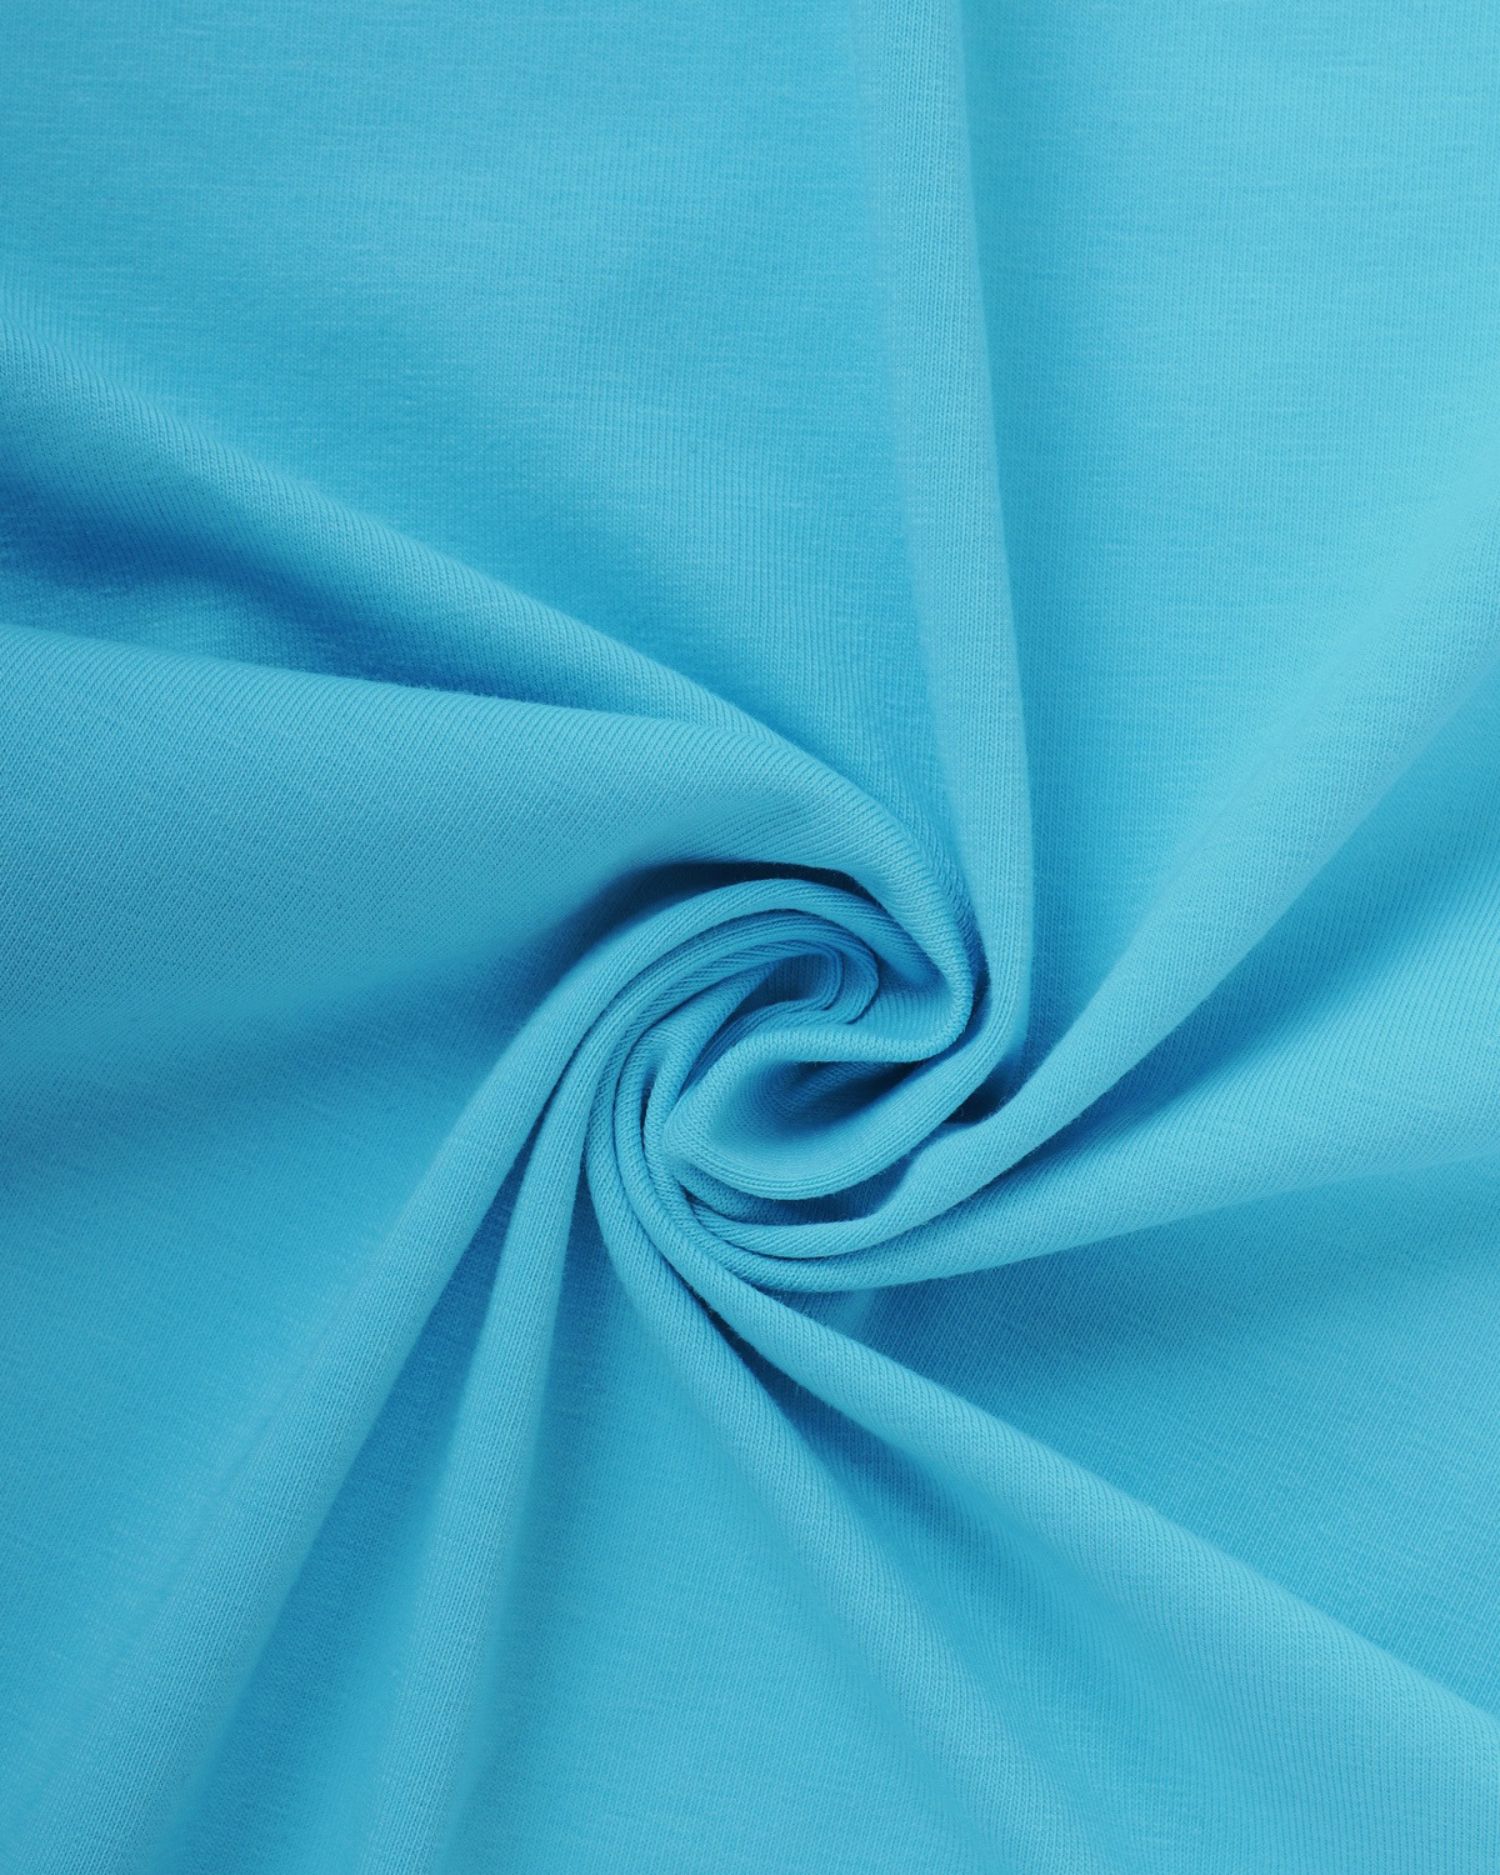 Cotton single Jersey with elastane, 1 meter, 185gr/m2, turquoise